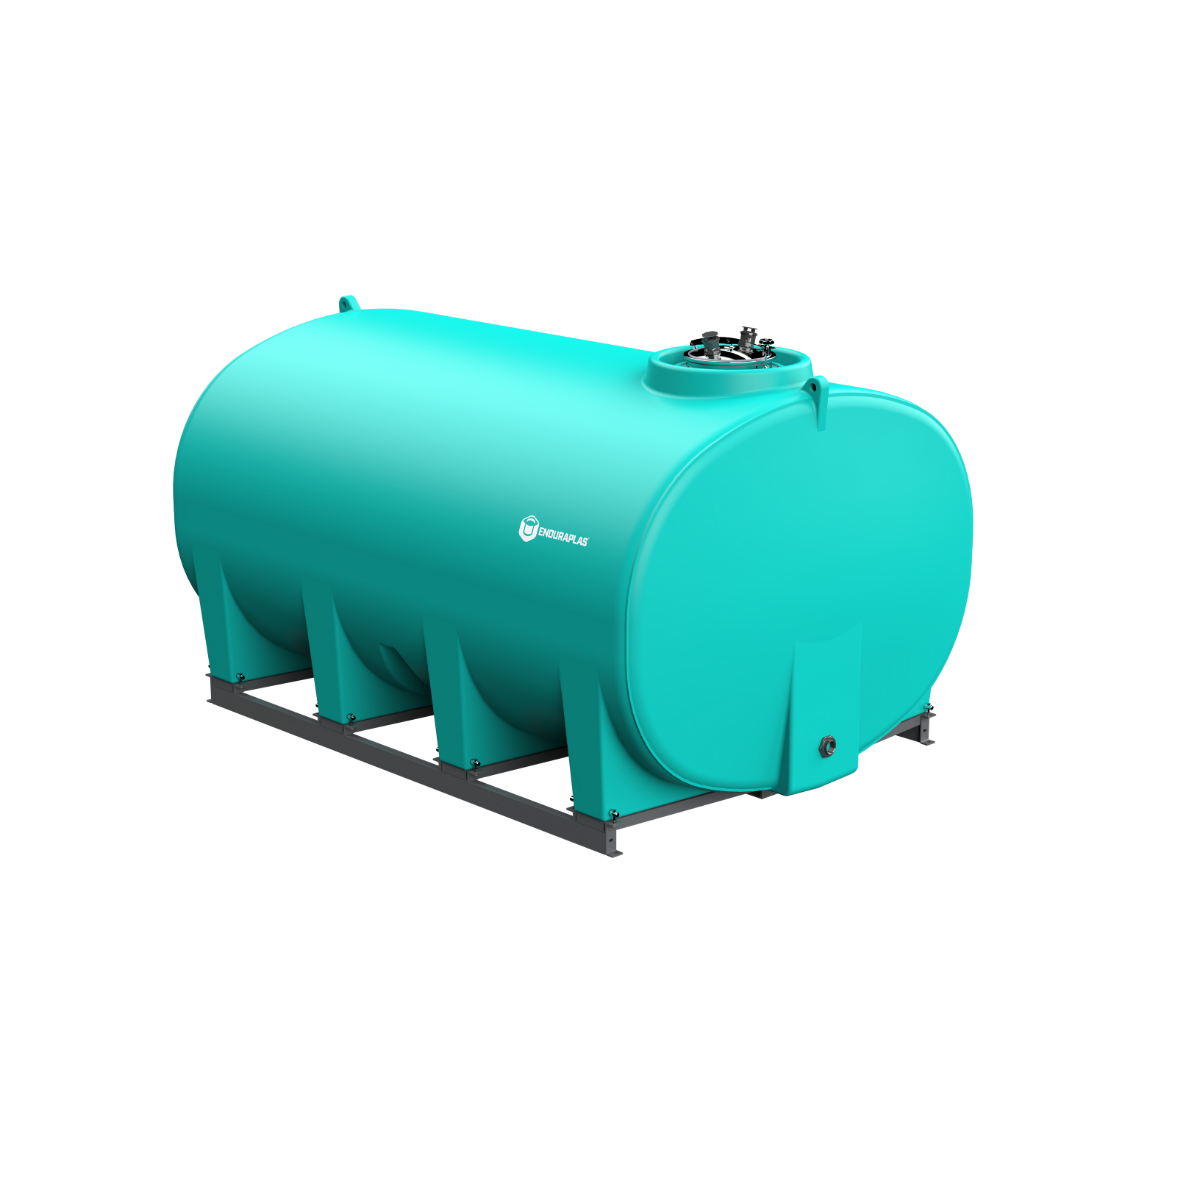 Buy 3000 Gallon Plastic Horizontal Skid Mounted Storage Tank with Frame and Sump Bottom in Green by Enduraplas of Green color for only $12,671.00